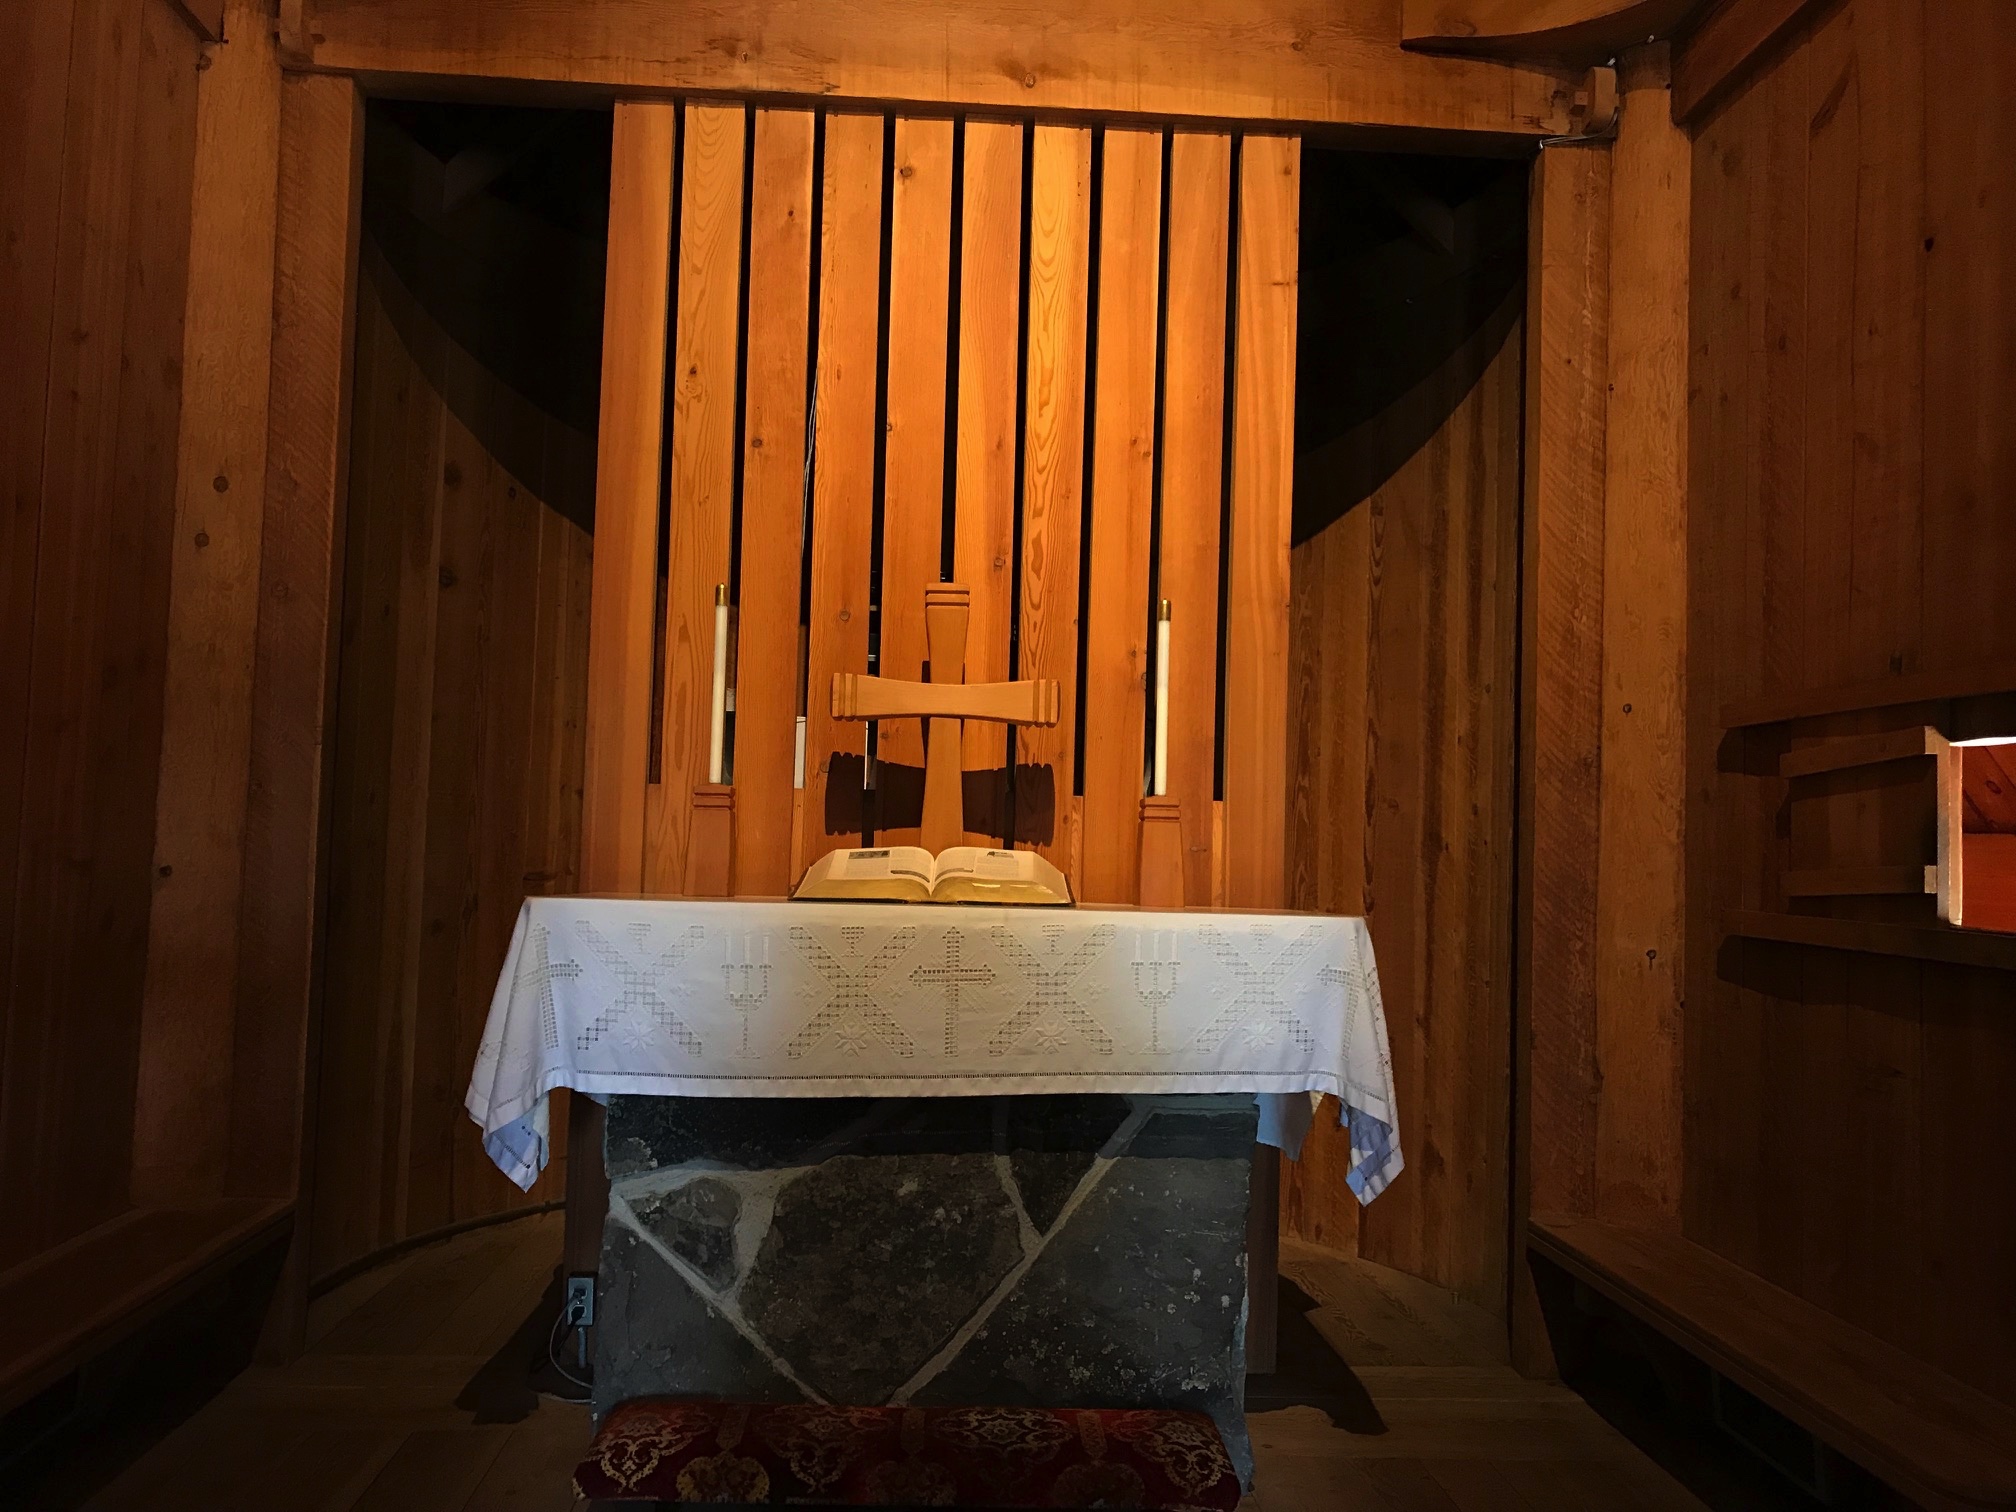 Stone altar of a church with a wooden backdrop